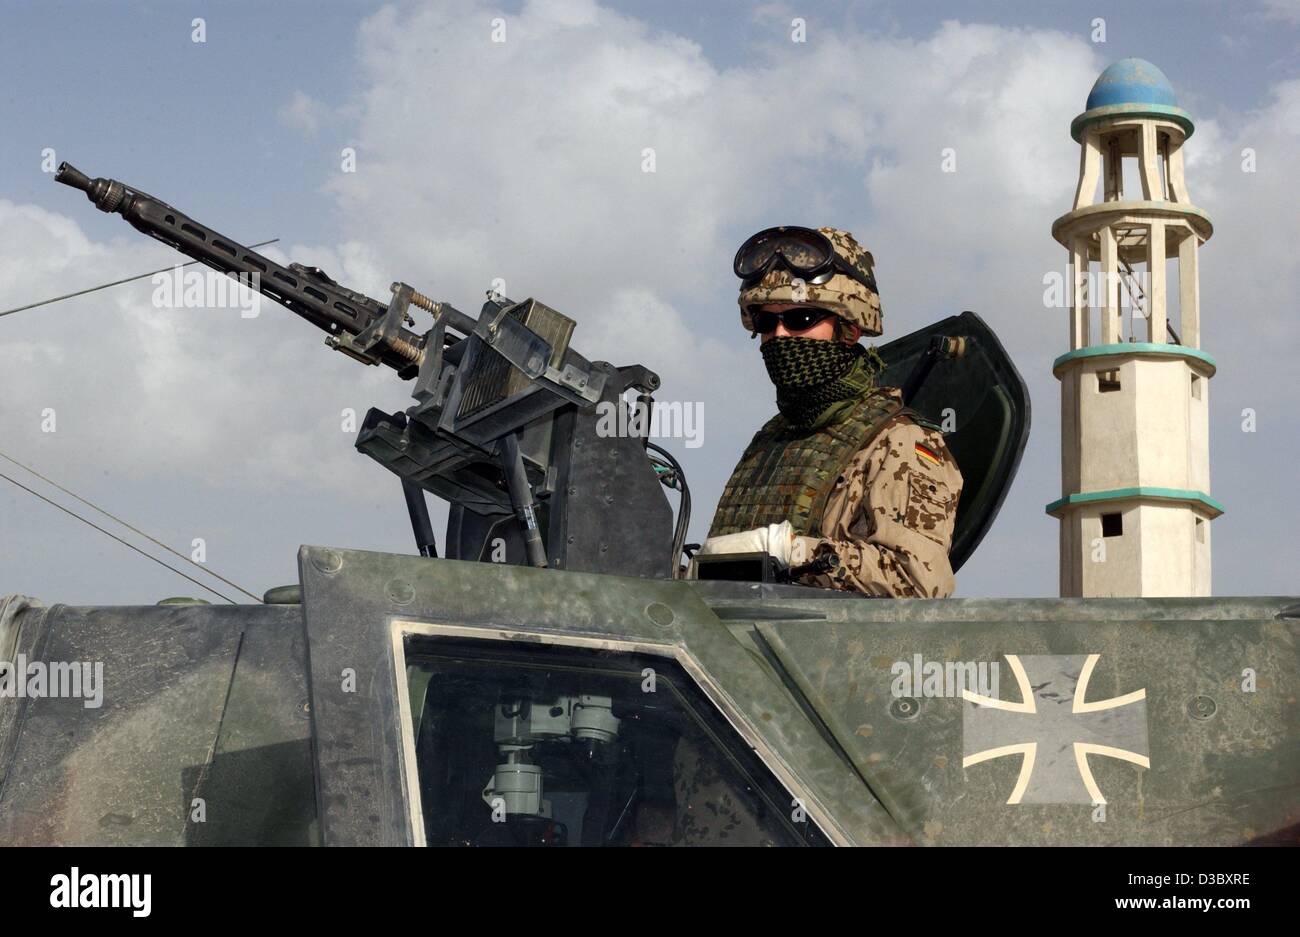 (dpa) - A Bundeswehr soldier of the International Security Assistance Force (ISAF) patrols in an armoured Dingo in front of a minaret the streets of Karteparwan, a northern district of Kabul, Afghanistan, 4 August 2003. Next Monday, 11 August, Germany and the Netherlands will hand over leadership of Stock Photo